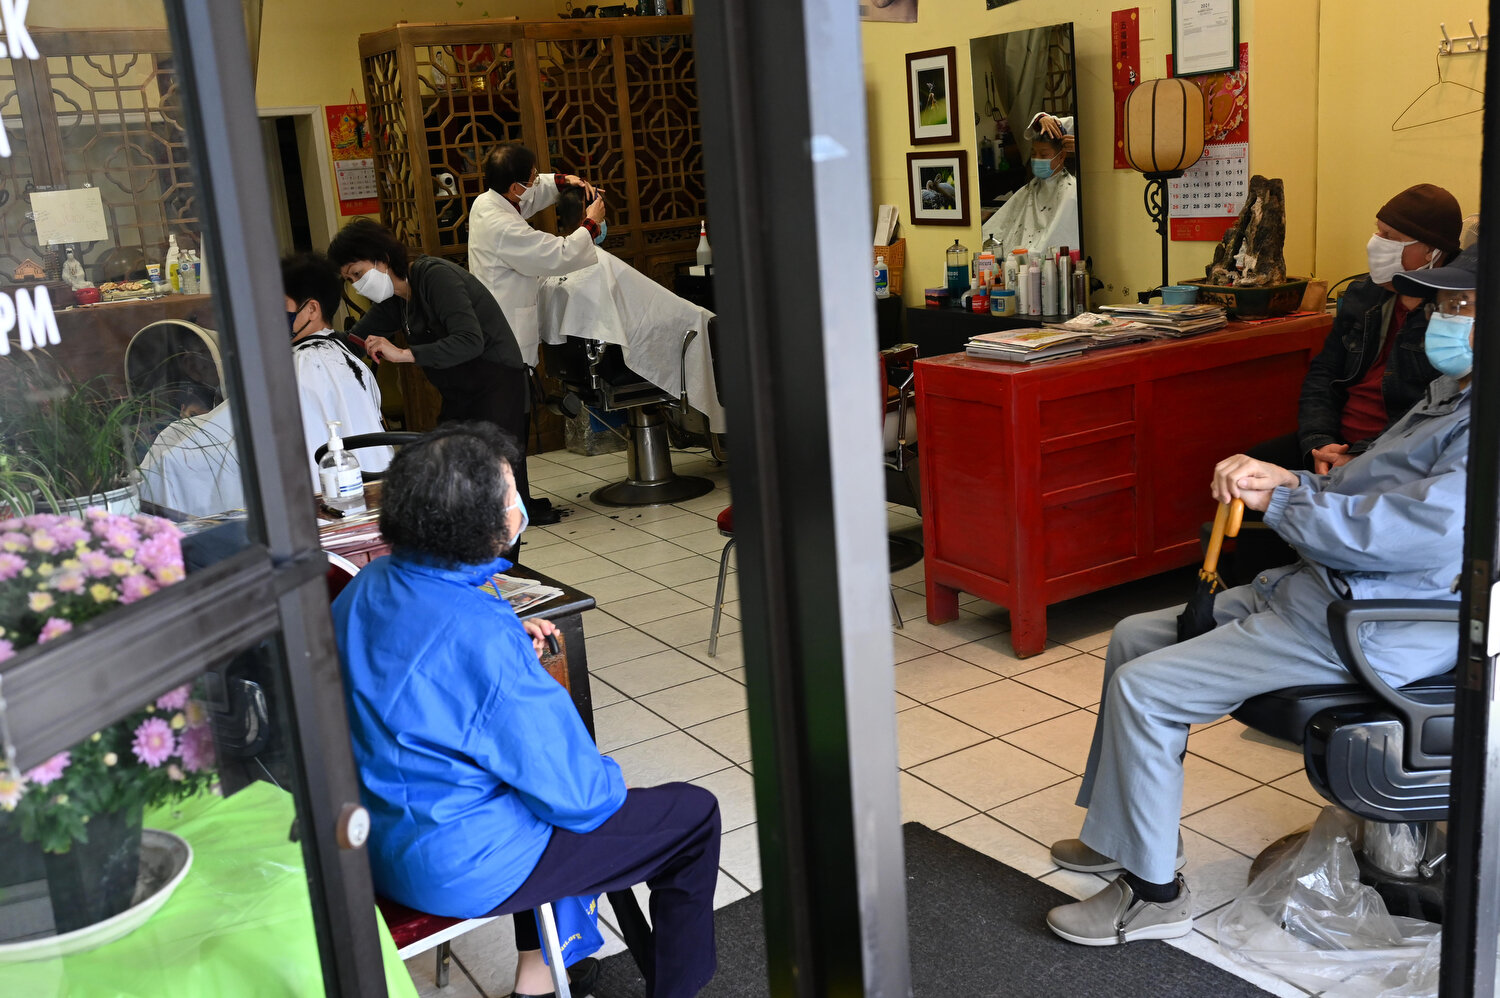  After a quiet morning, an afternoon rush occurs and all the chairs get filled with customers. Wong says, though unusual now, this is typical of their day-to-day prior to the pandemic. 